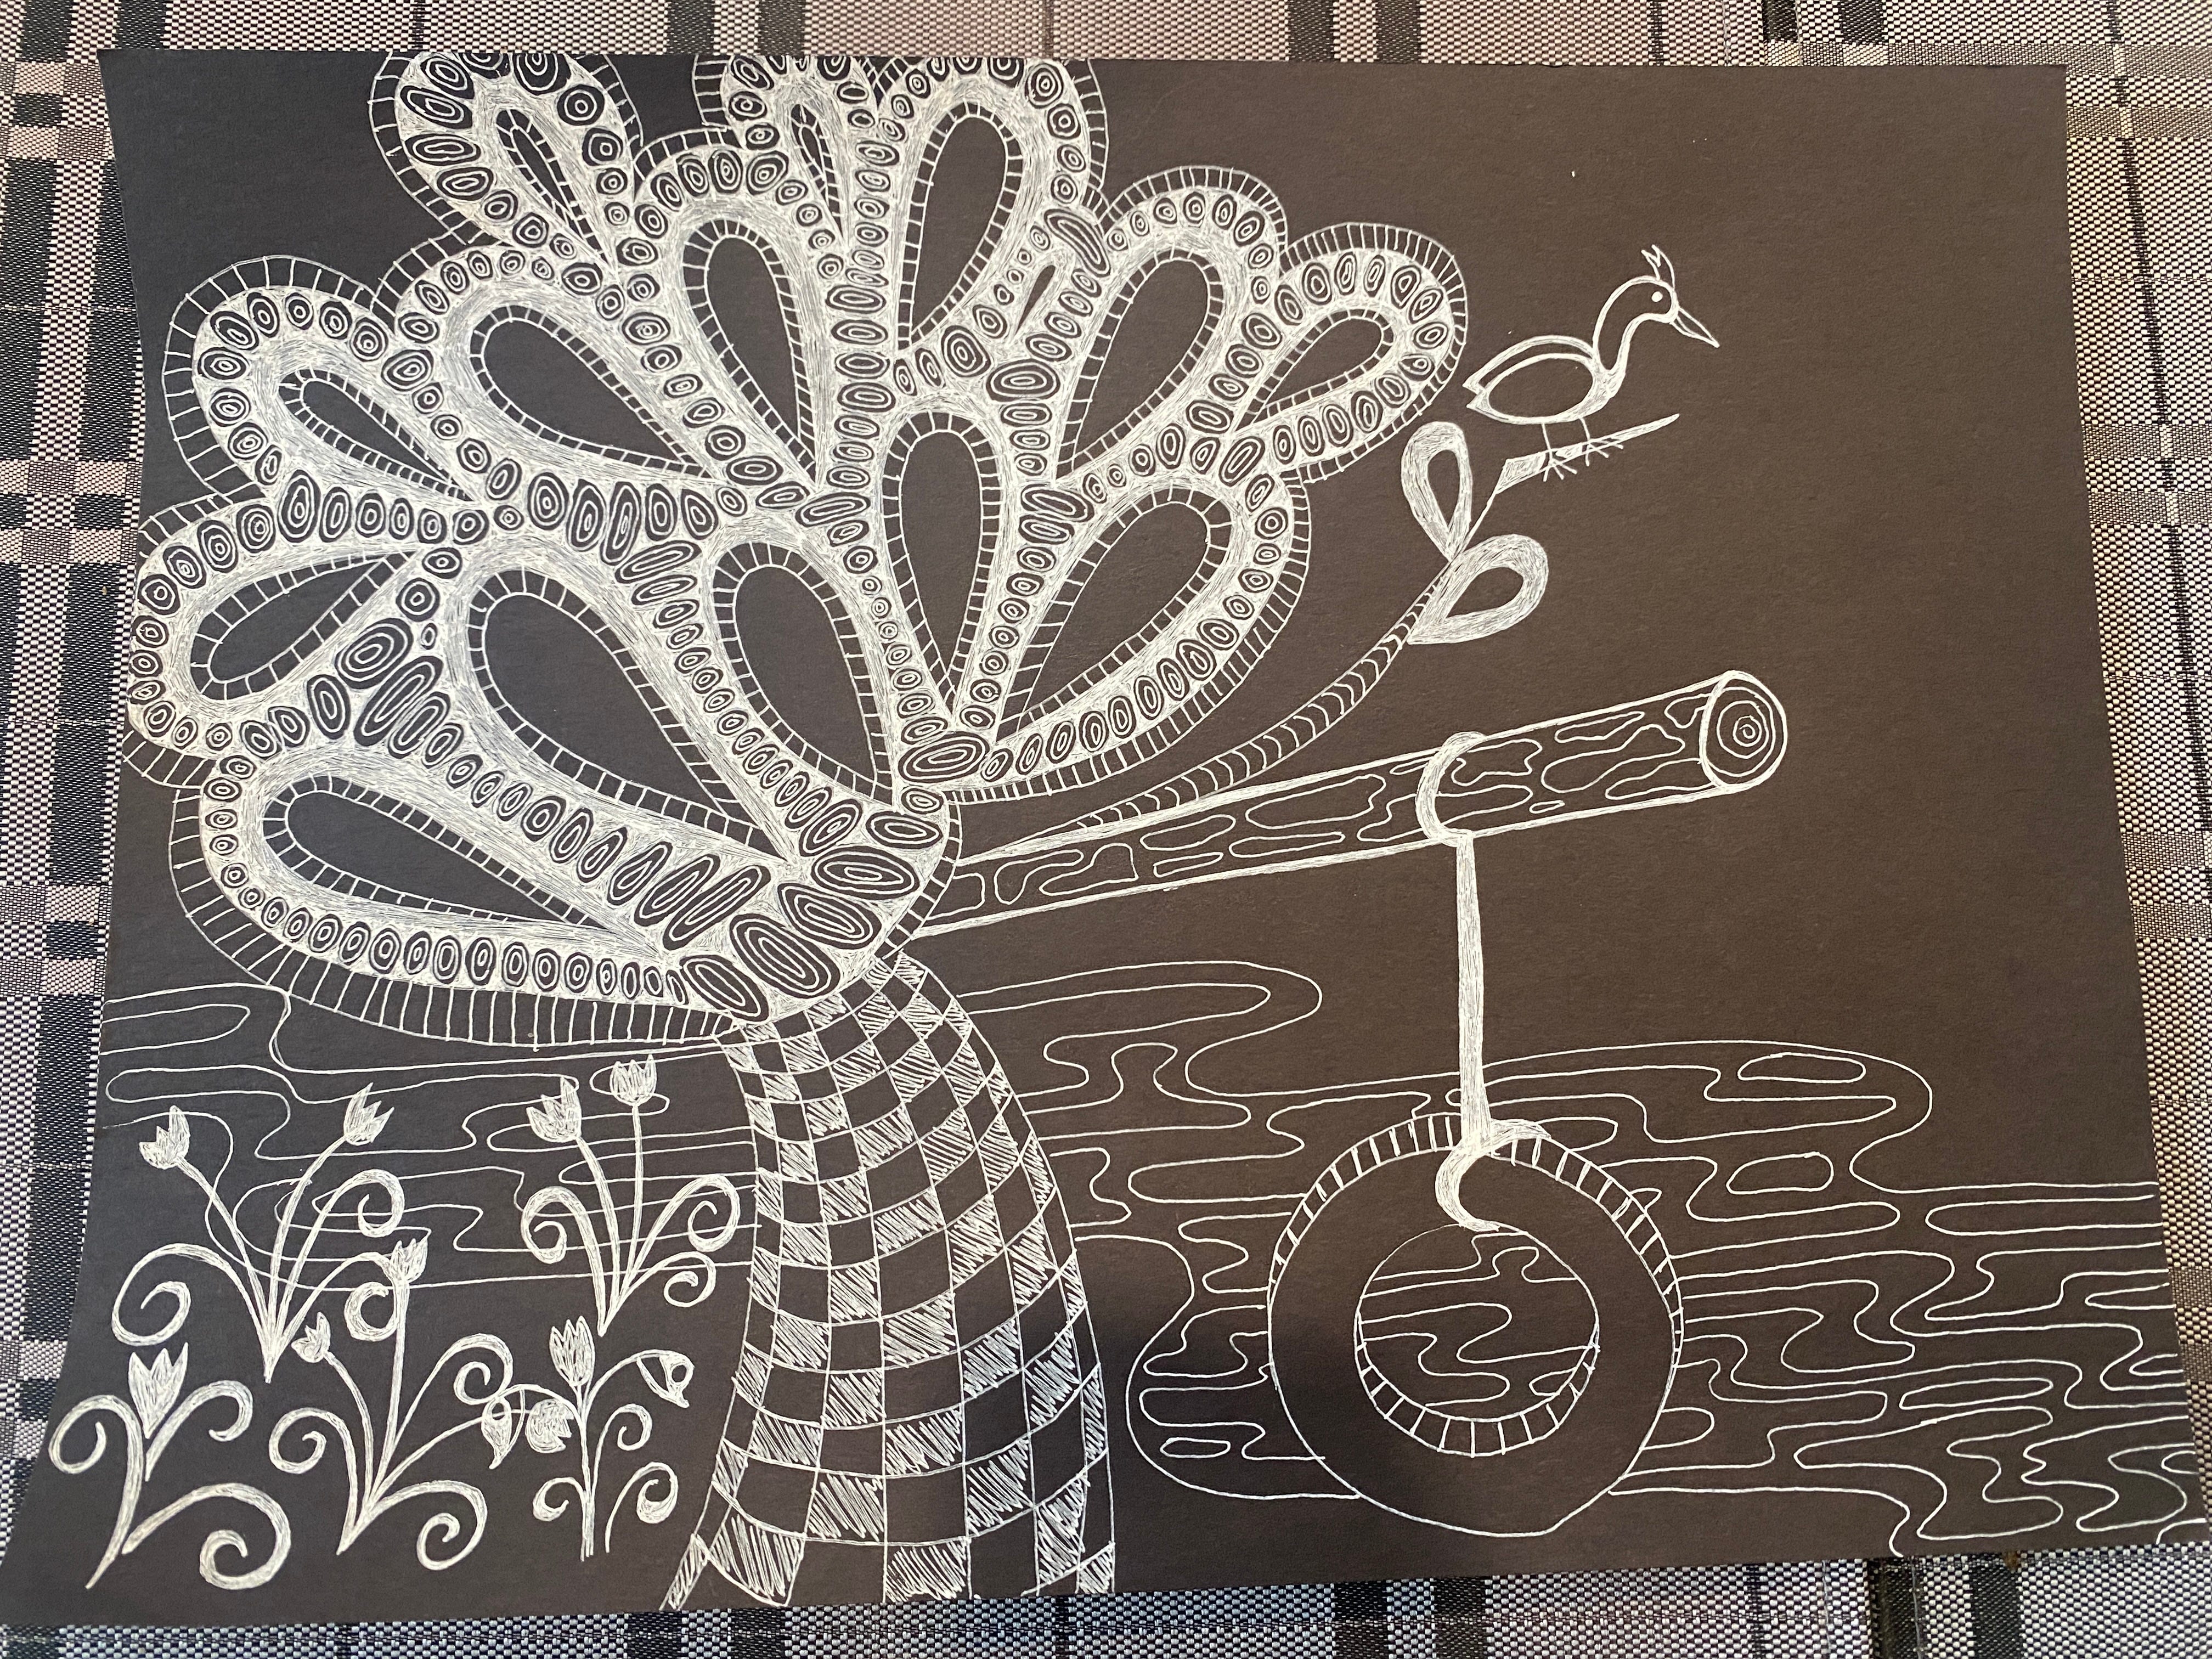 Using White Ink on Black Paper. Trying a new type of drawing, by Jillian  Amatt - Artistic Voyages, Share Your Creativity